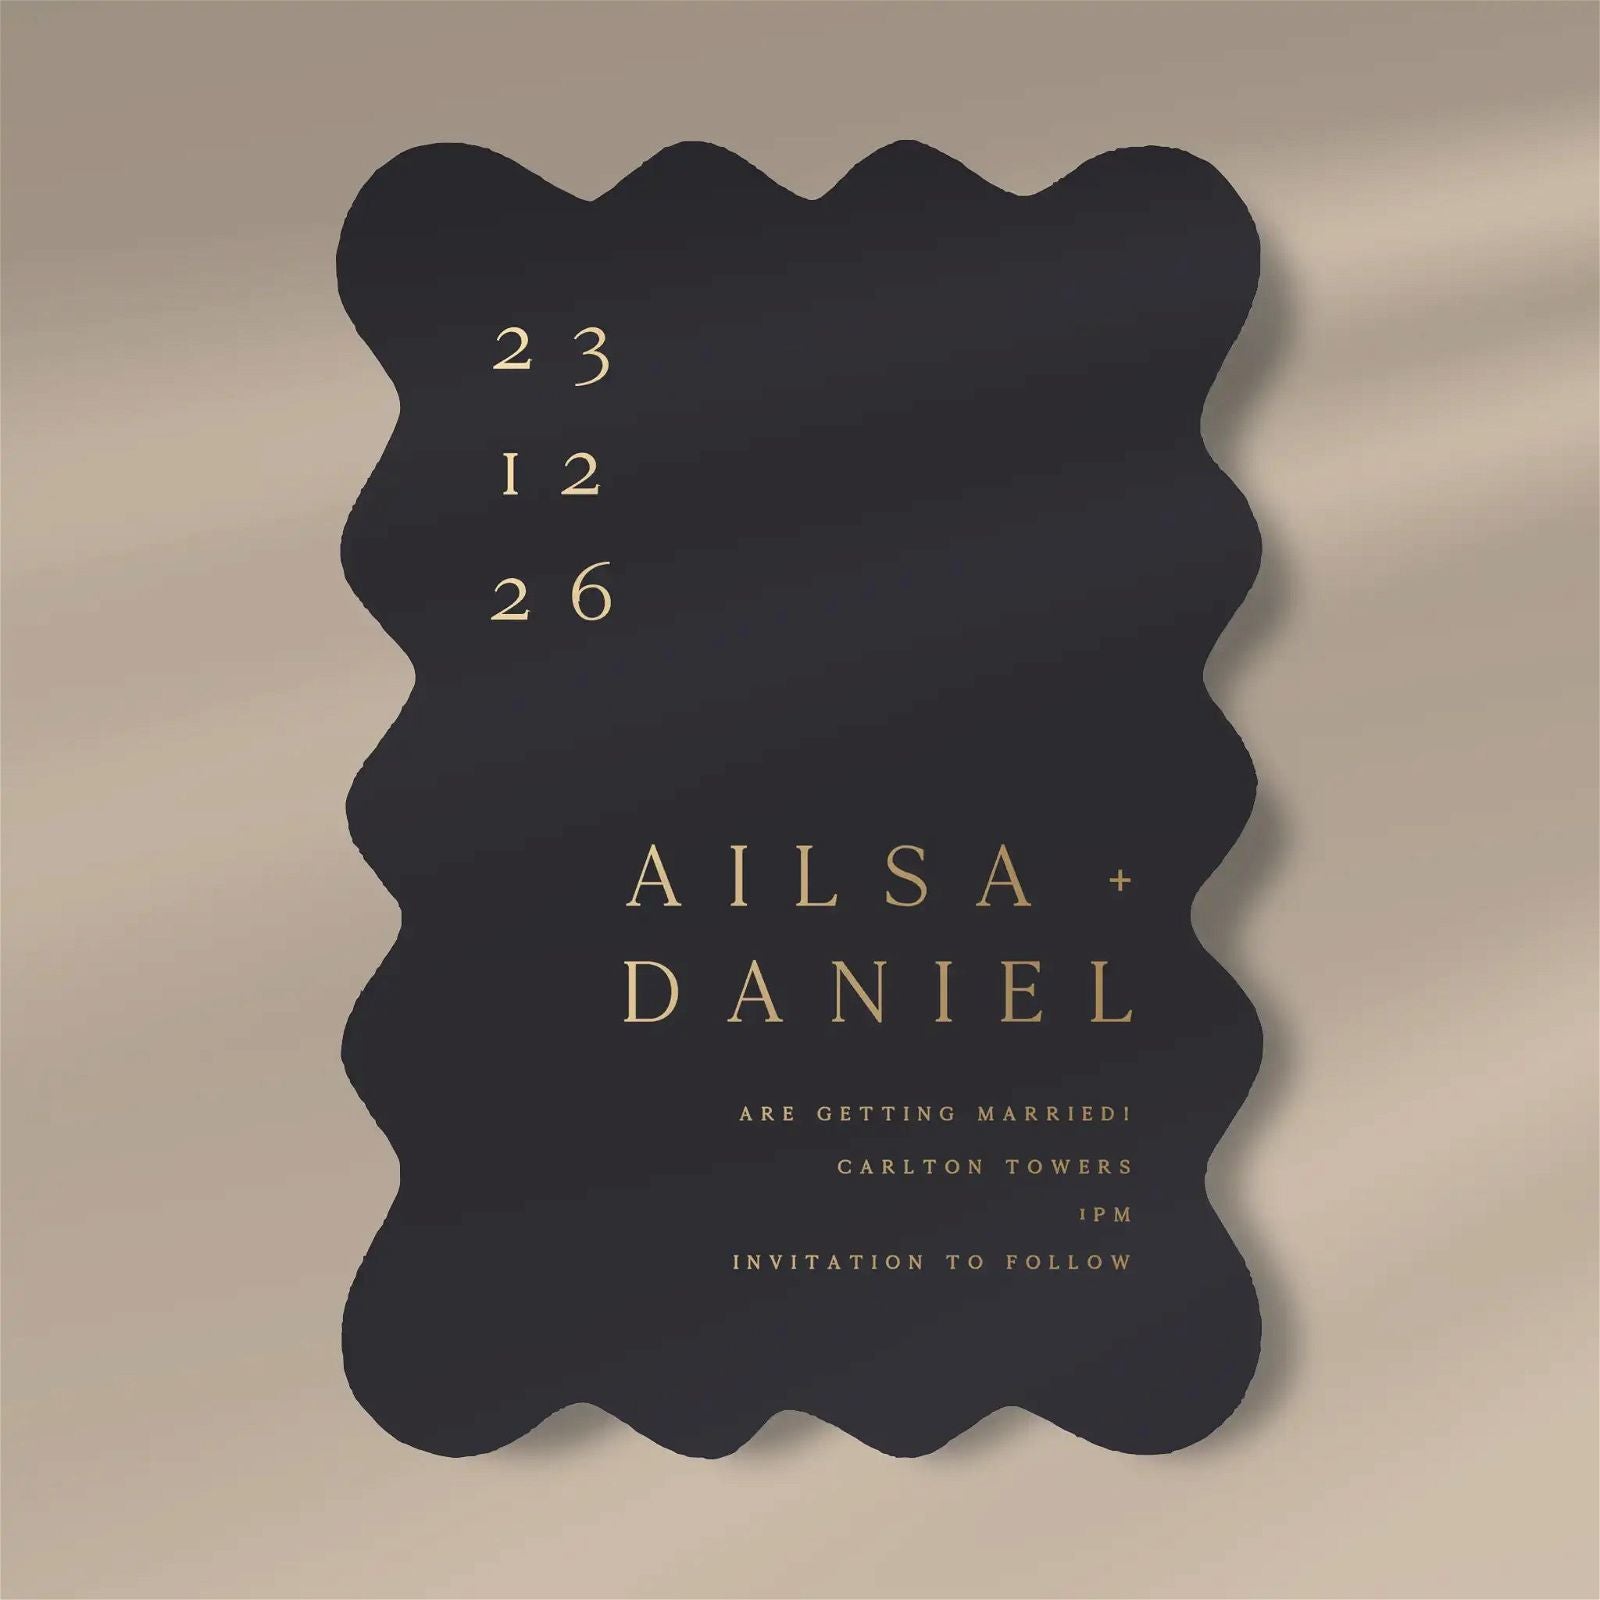 Ailsa | Simple Wedding Invitations  Ivy and Gold Wedding Stationery   